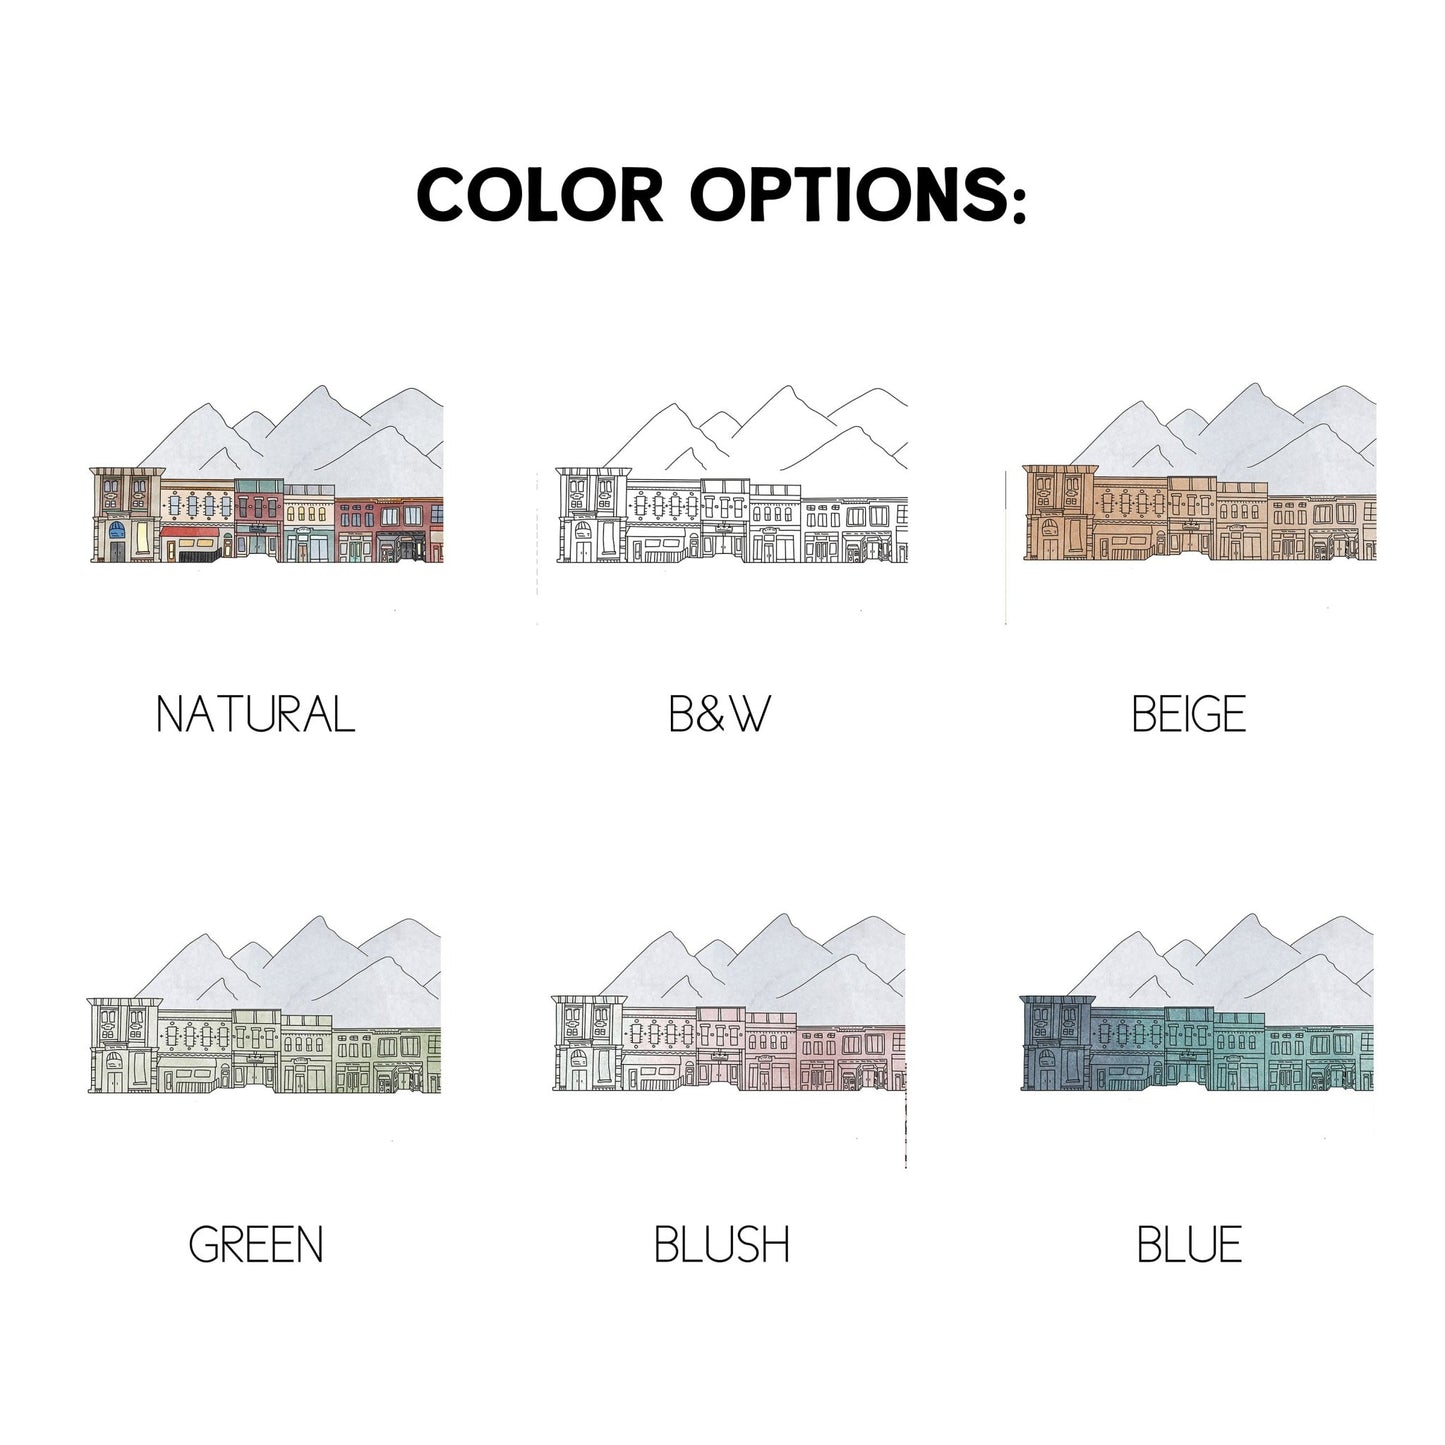 Examples of the 6 colors available for skyline drawings - natural, black and white, blue, blush, beige, and green